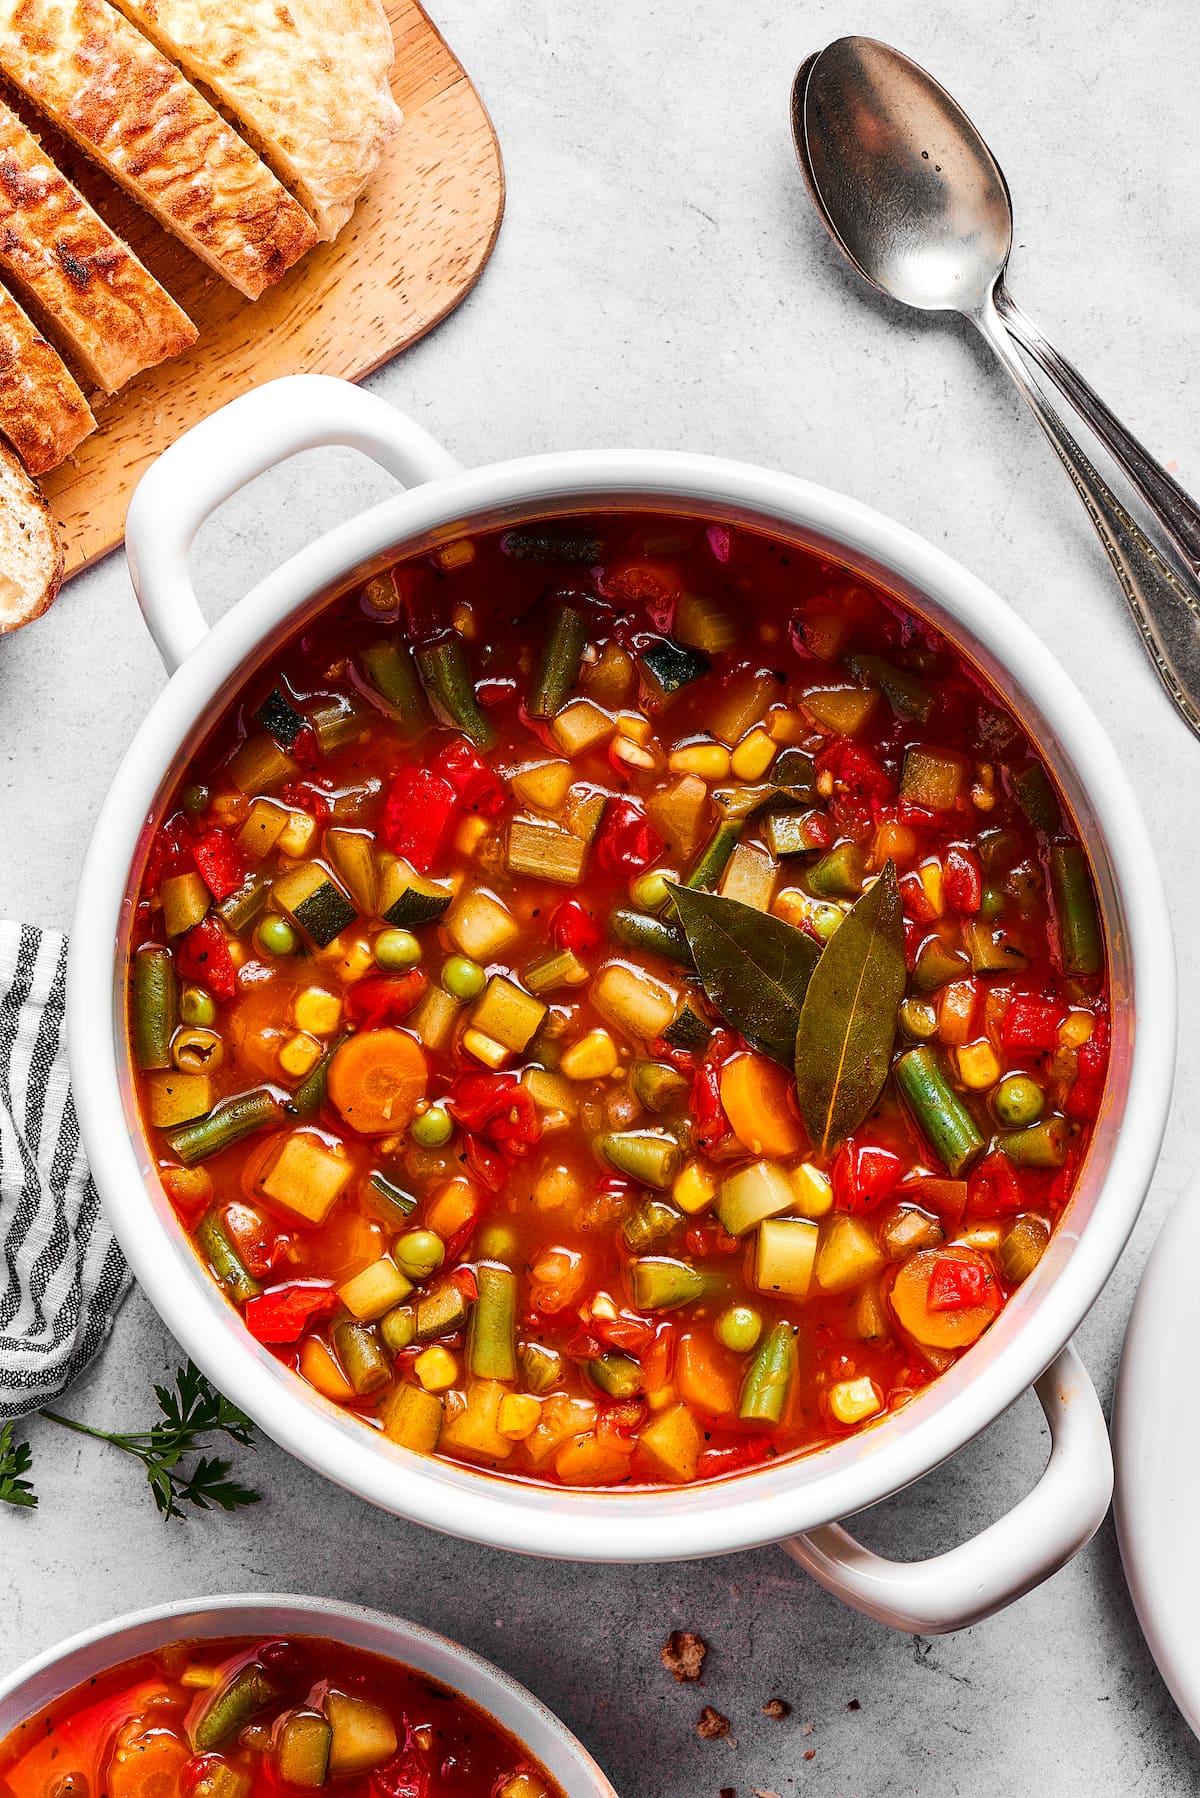 A pot of vegetable soup next to a loaf of crusty bread and a spoon.